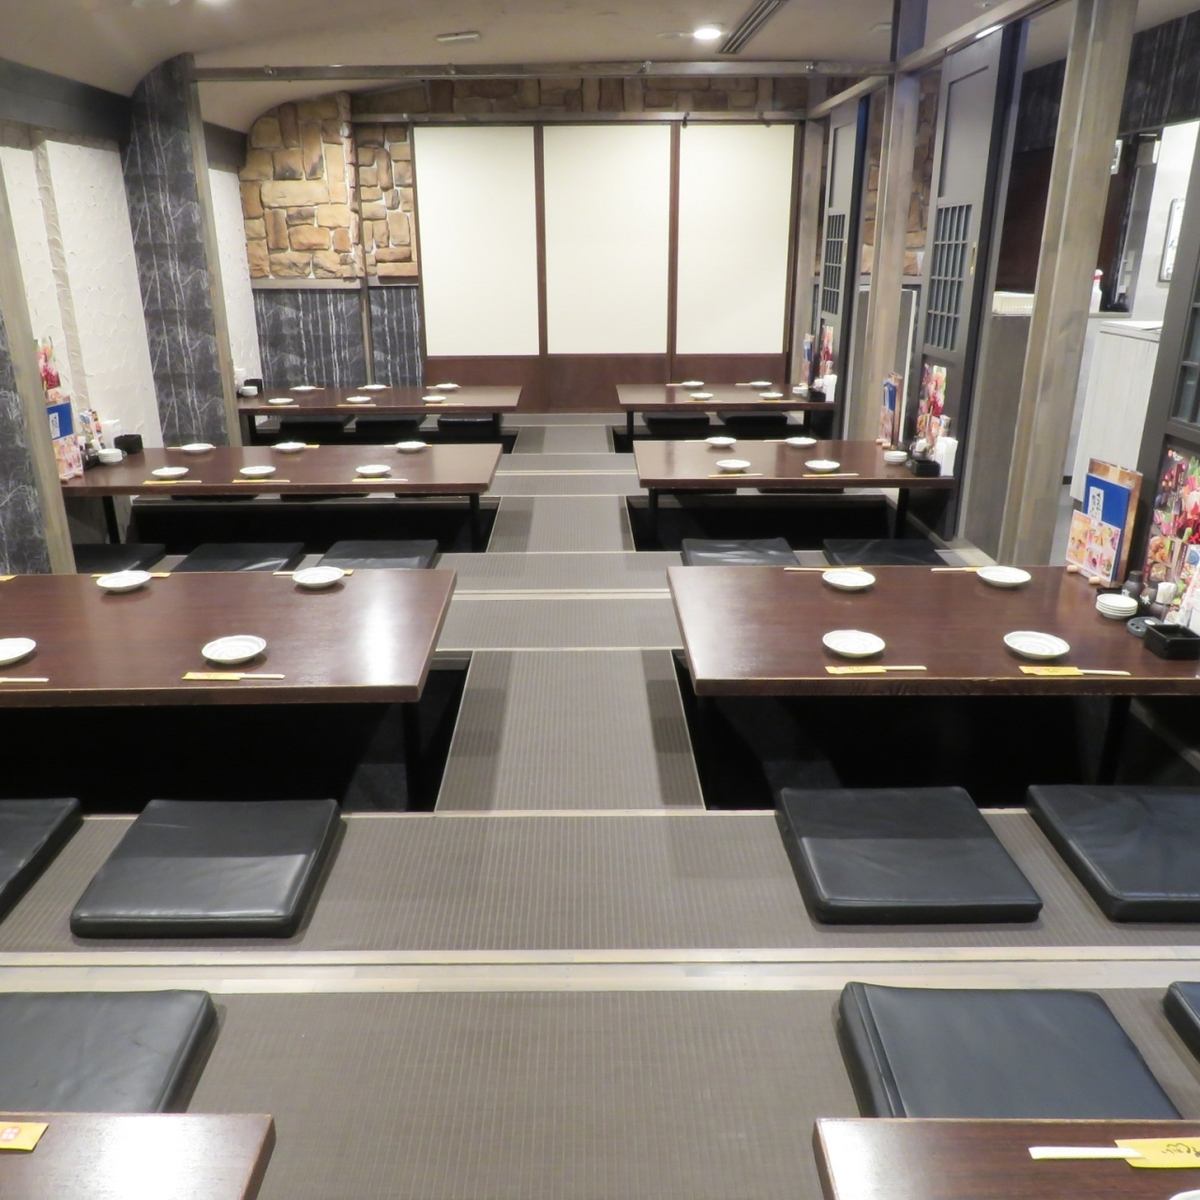 Completely equipped with a private room with a sunken kotatsu that can accommodate up to 50 people!